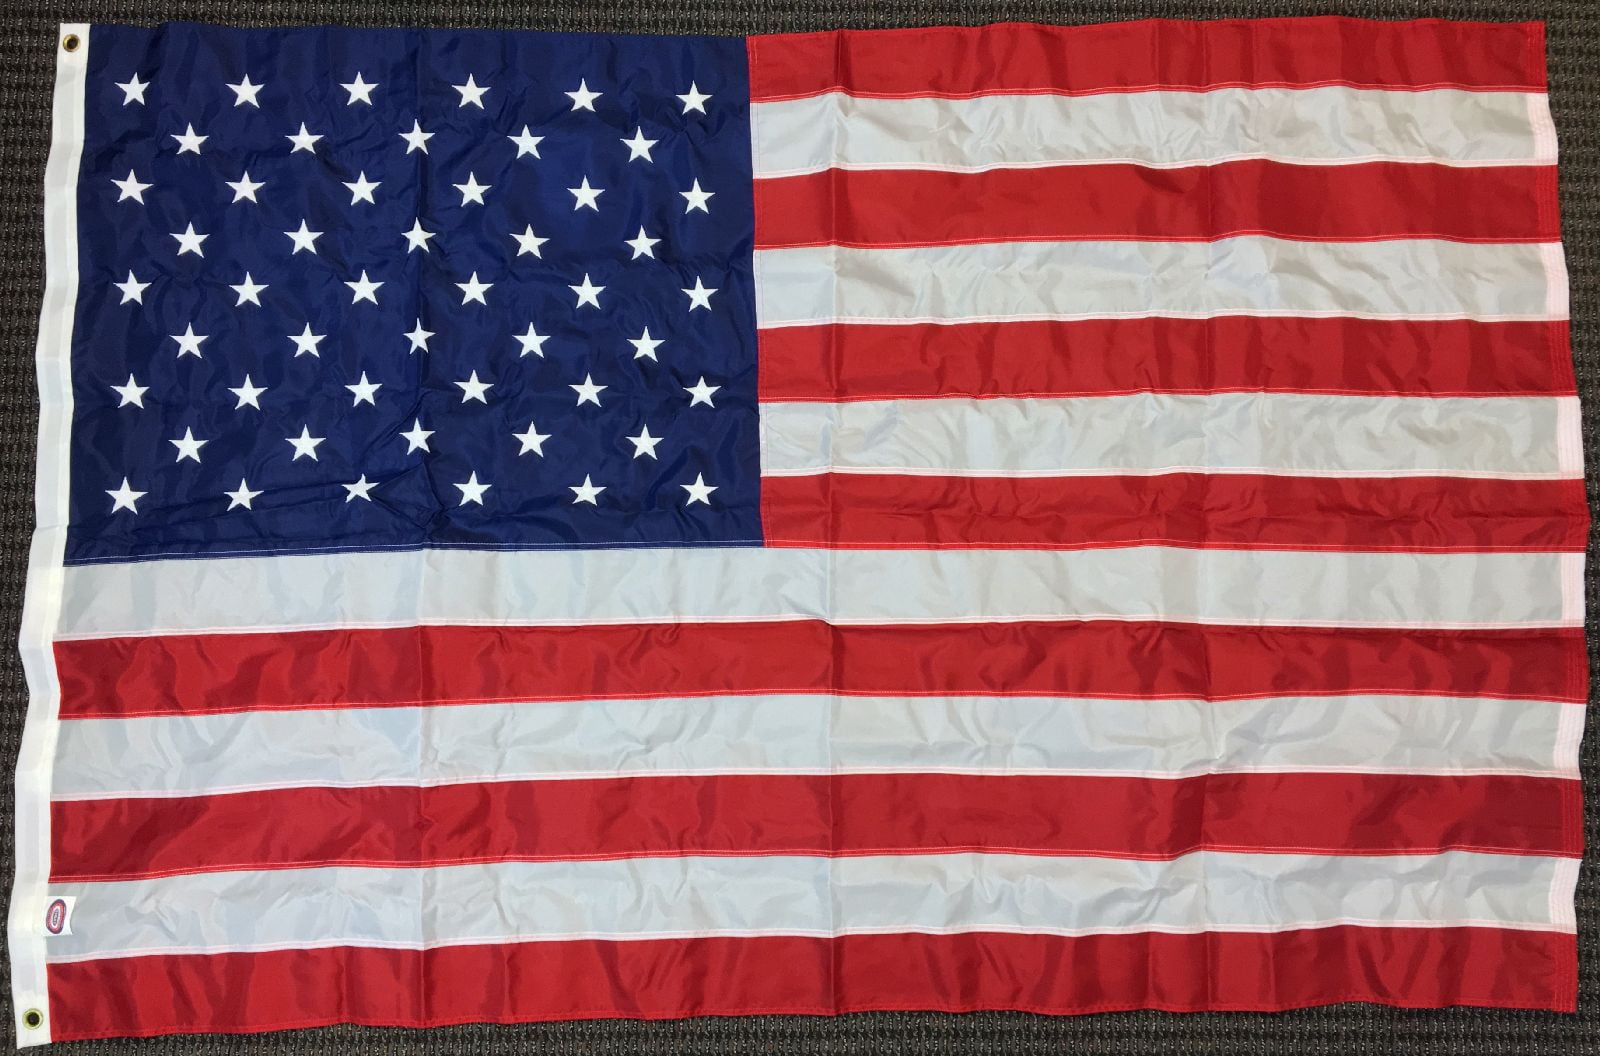 *USA MADE 3x5 foot US AMERICAN EMBROIDERED&SEWN 2-SIDED 300D NYLON FLAG Banner 